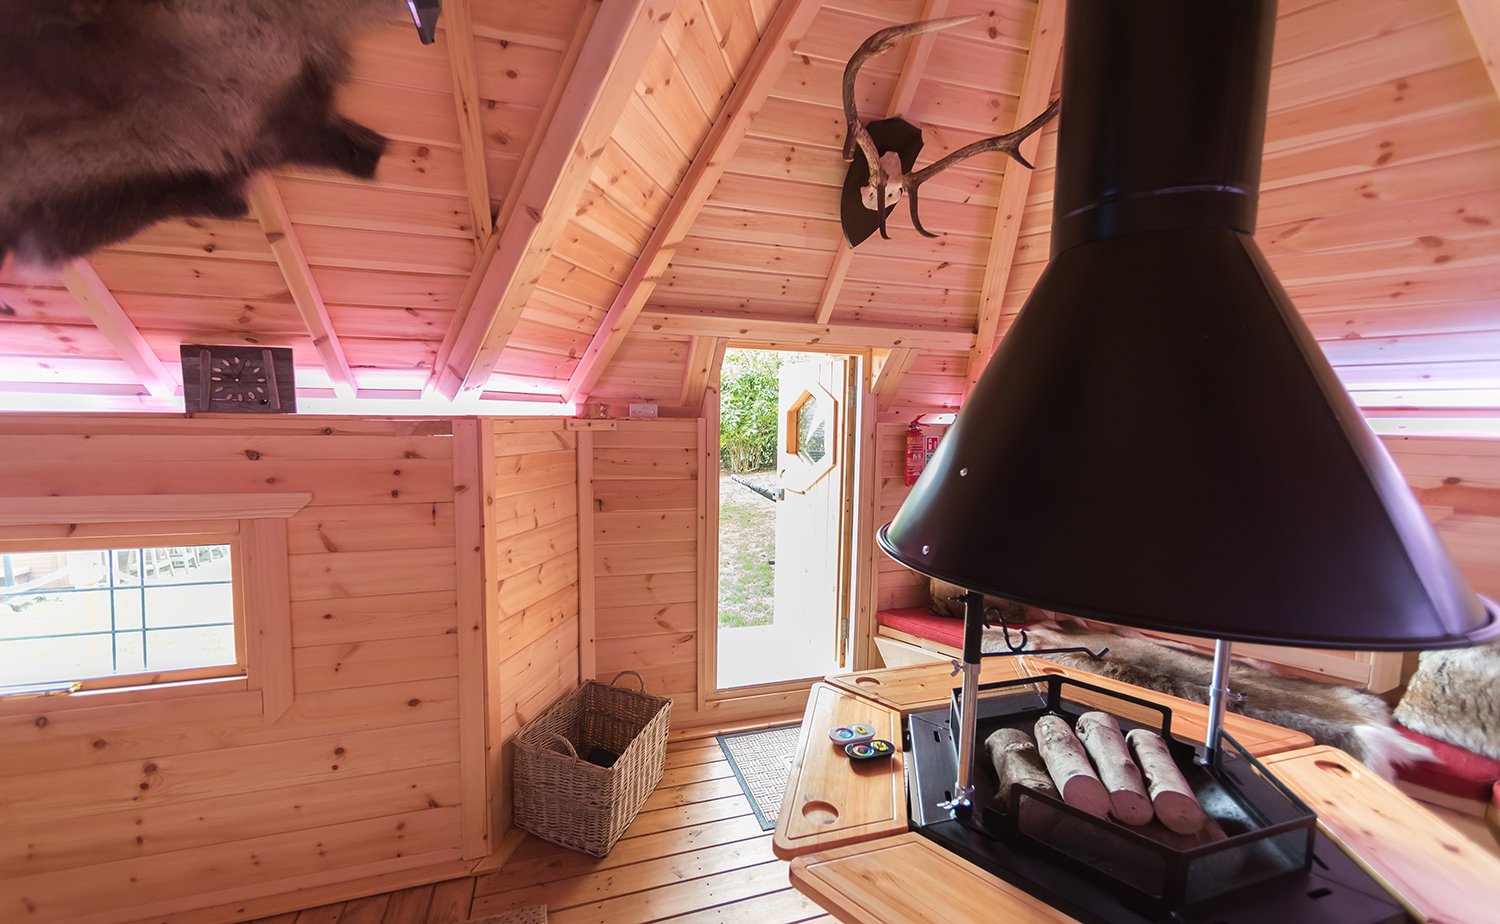 Inside a timber forest school cabin with BBQ unit with logs on